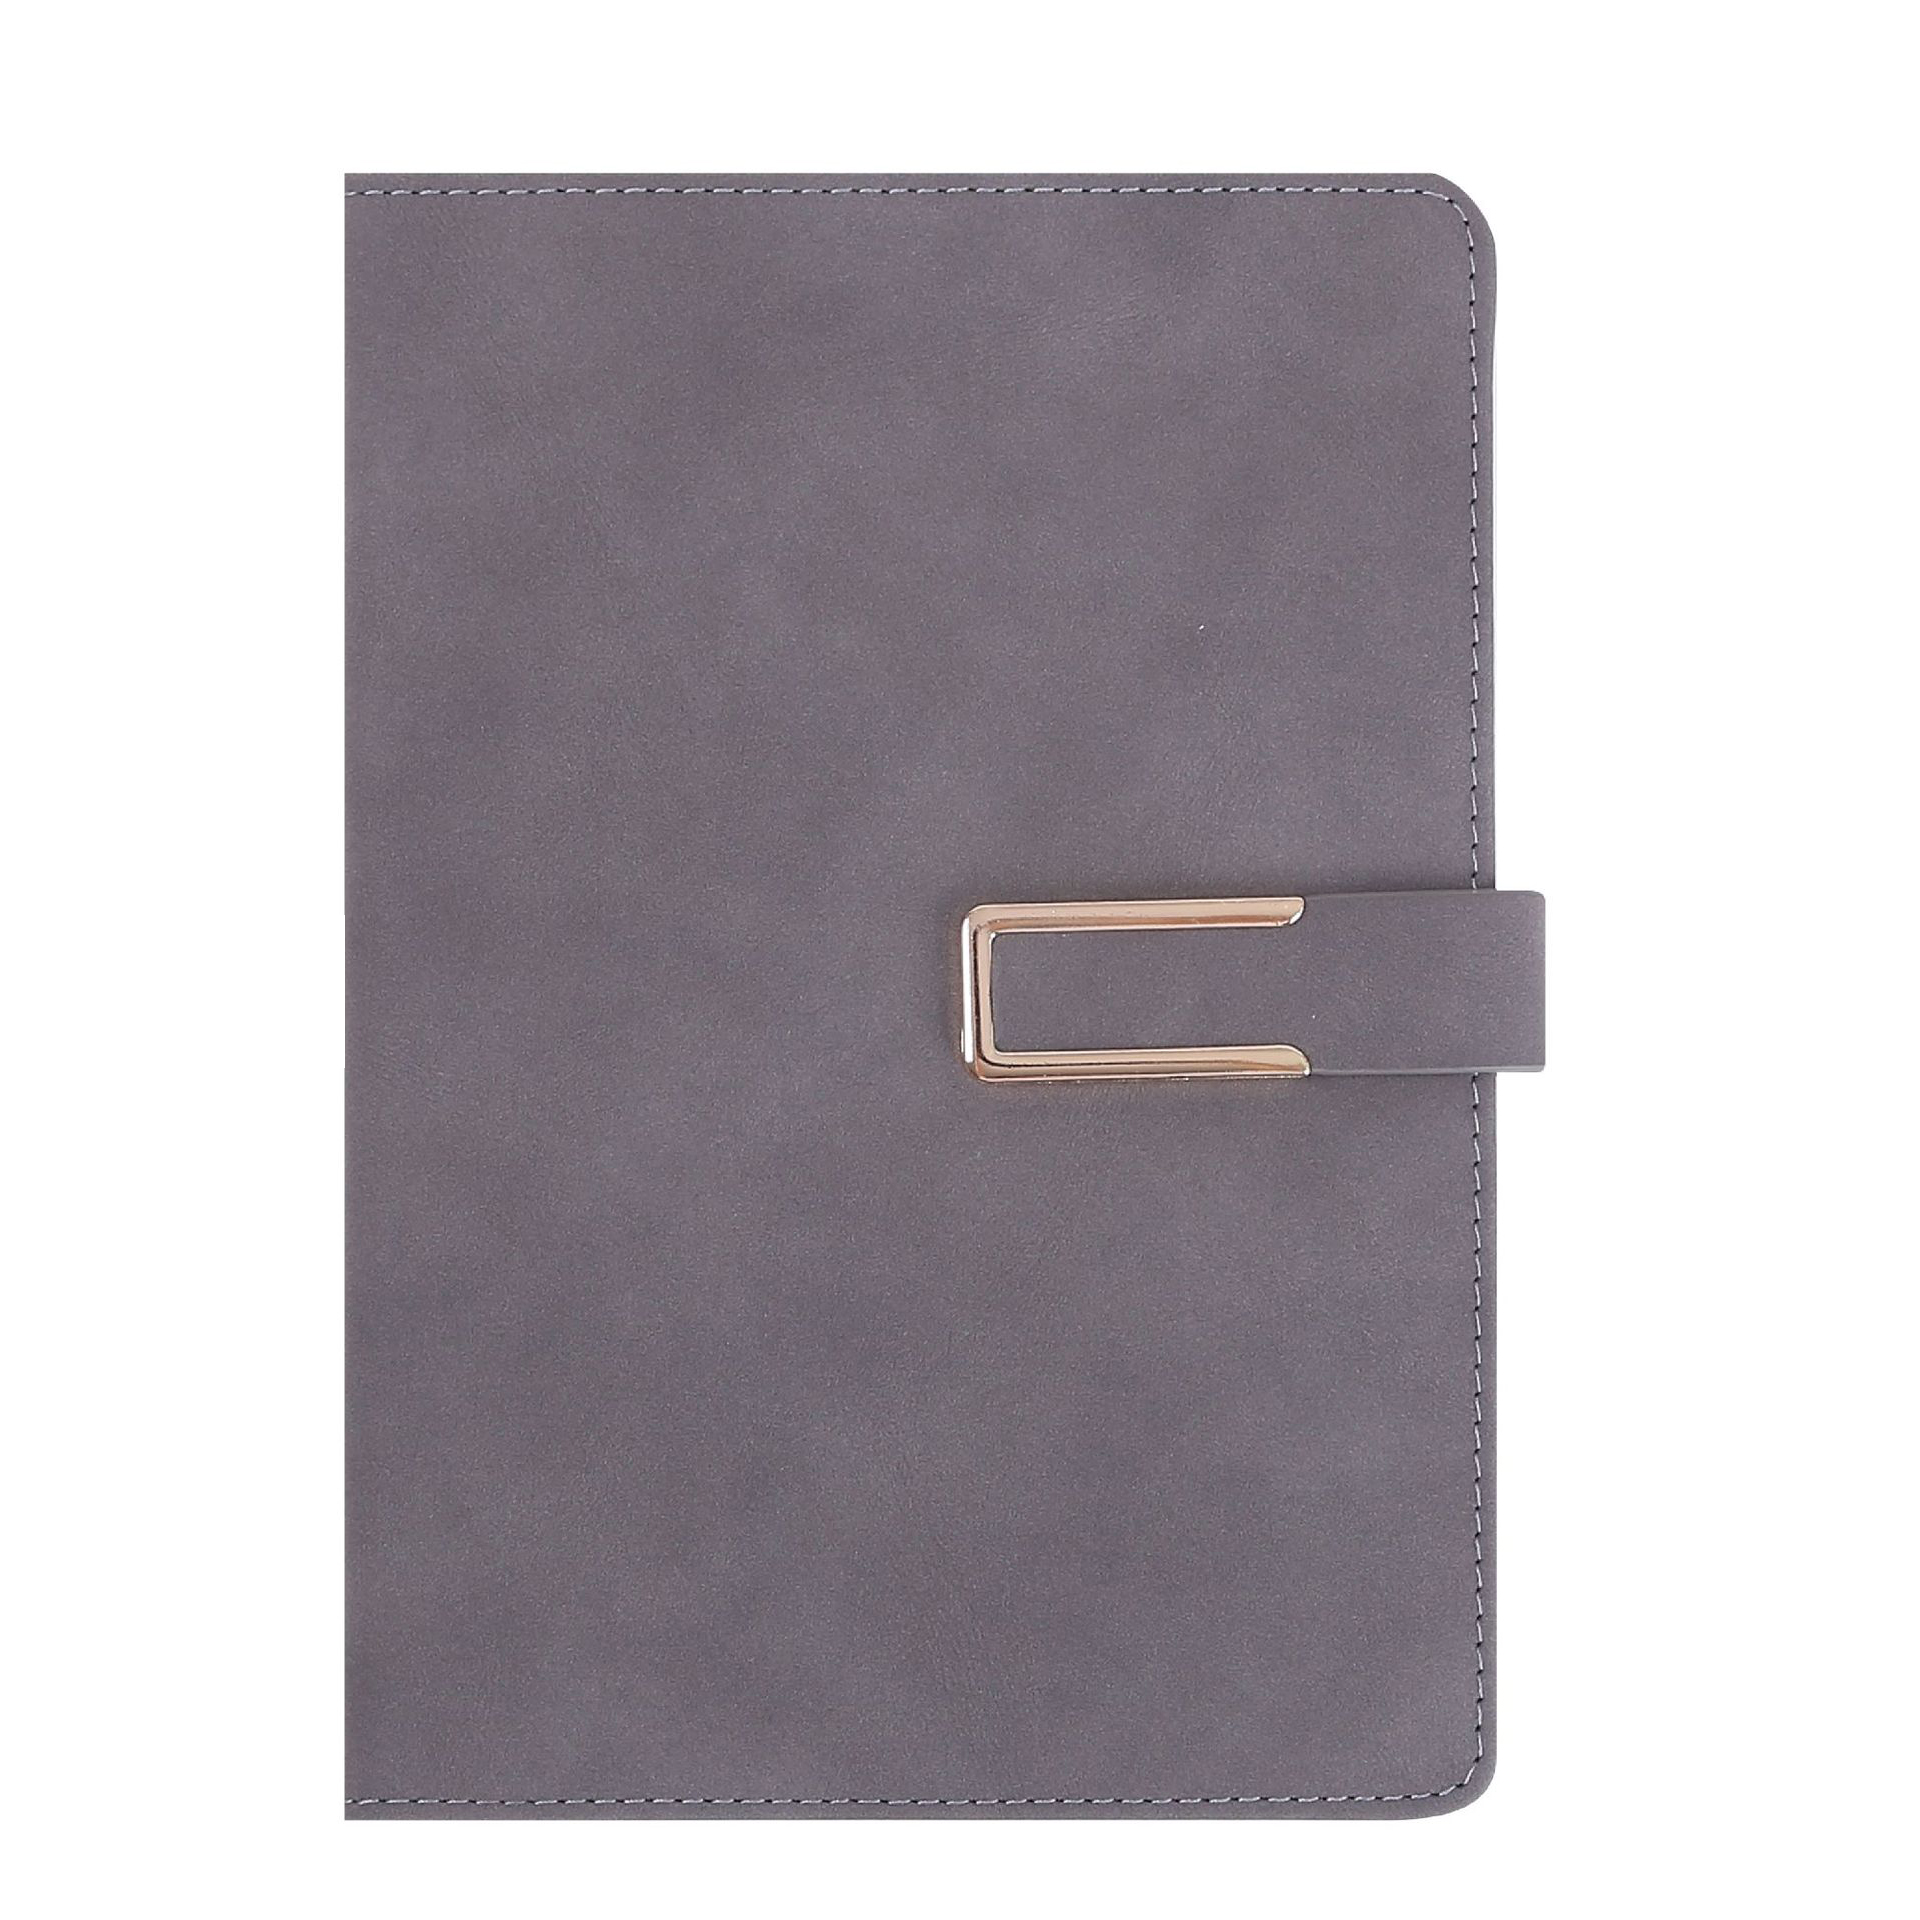 Custom notebooks branded diaries executive planners corporate ...